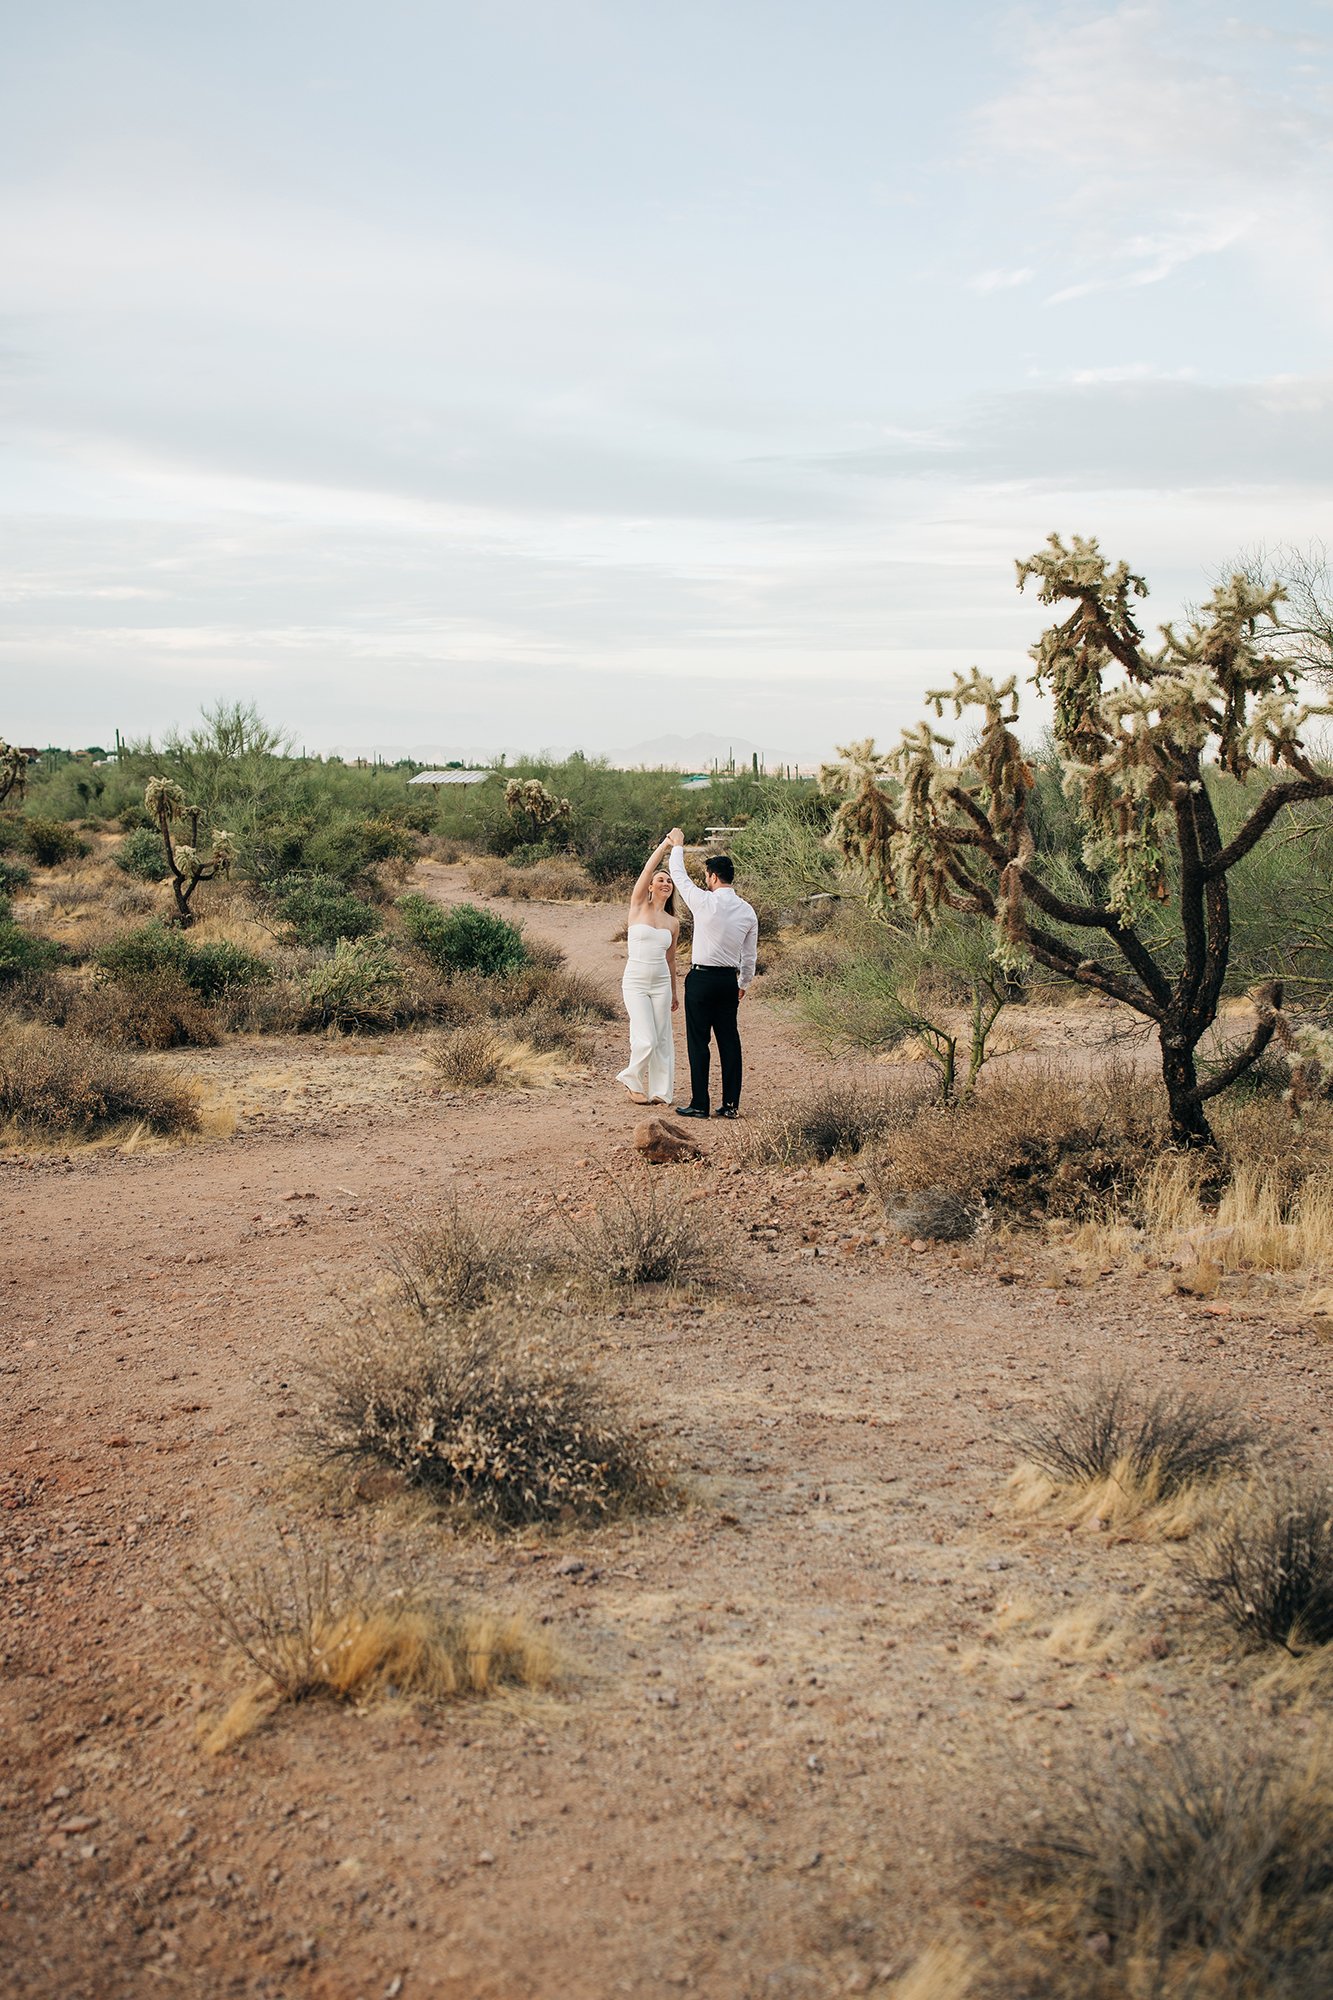 the-joys-of-a-morning-elopement-an-intimate-wedding-in-the-arizona-desert-5.jpg